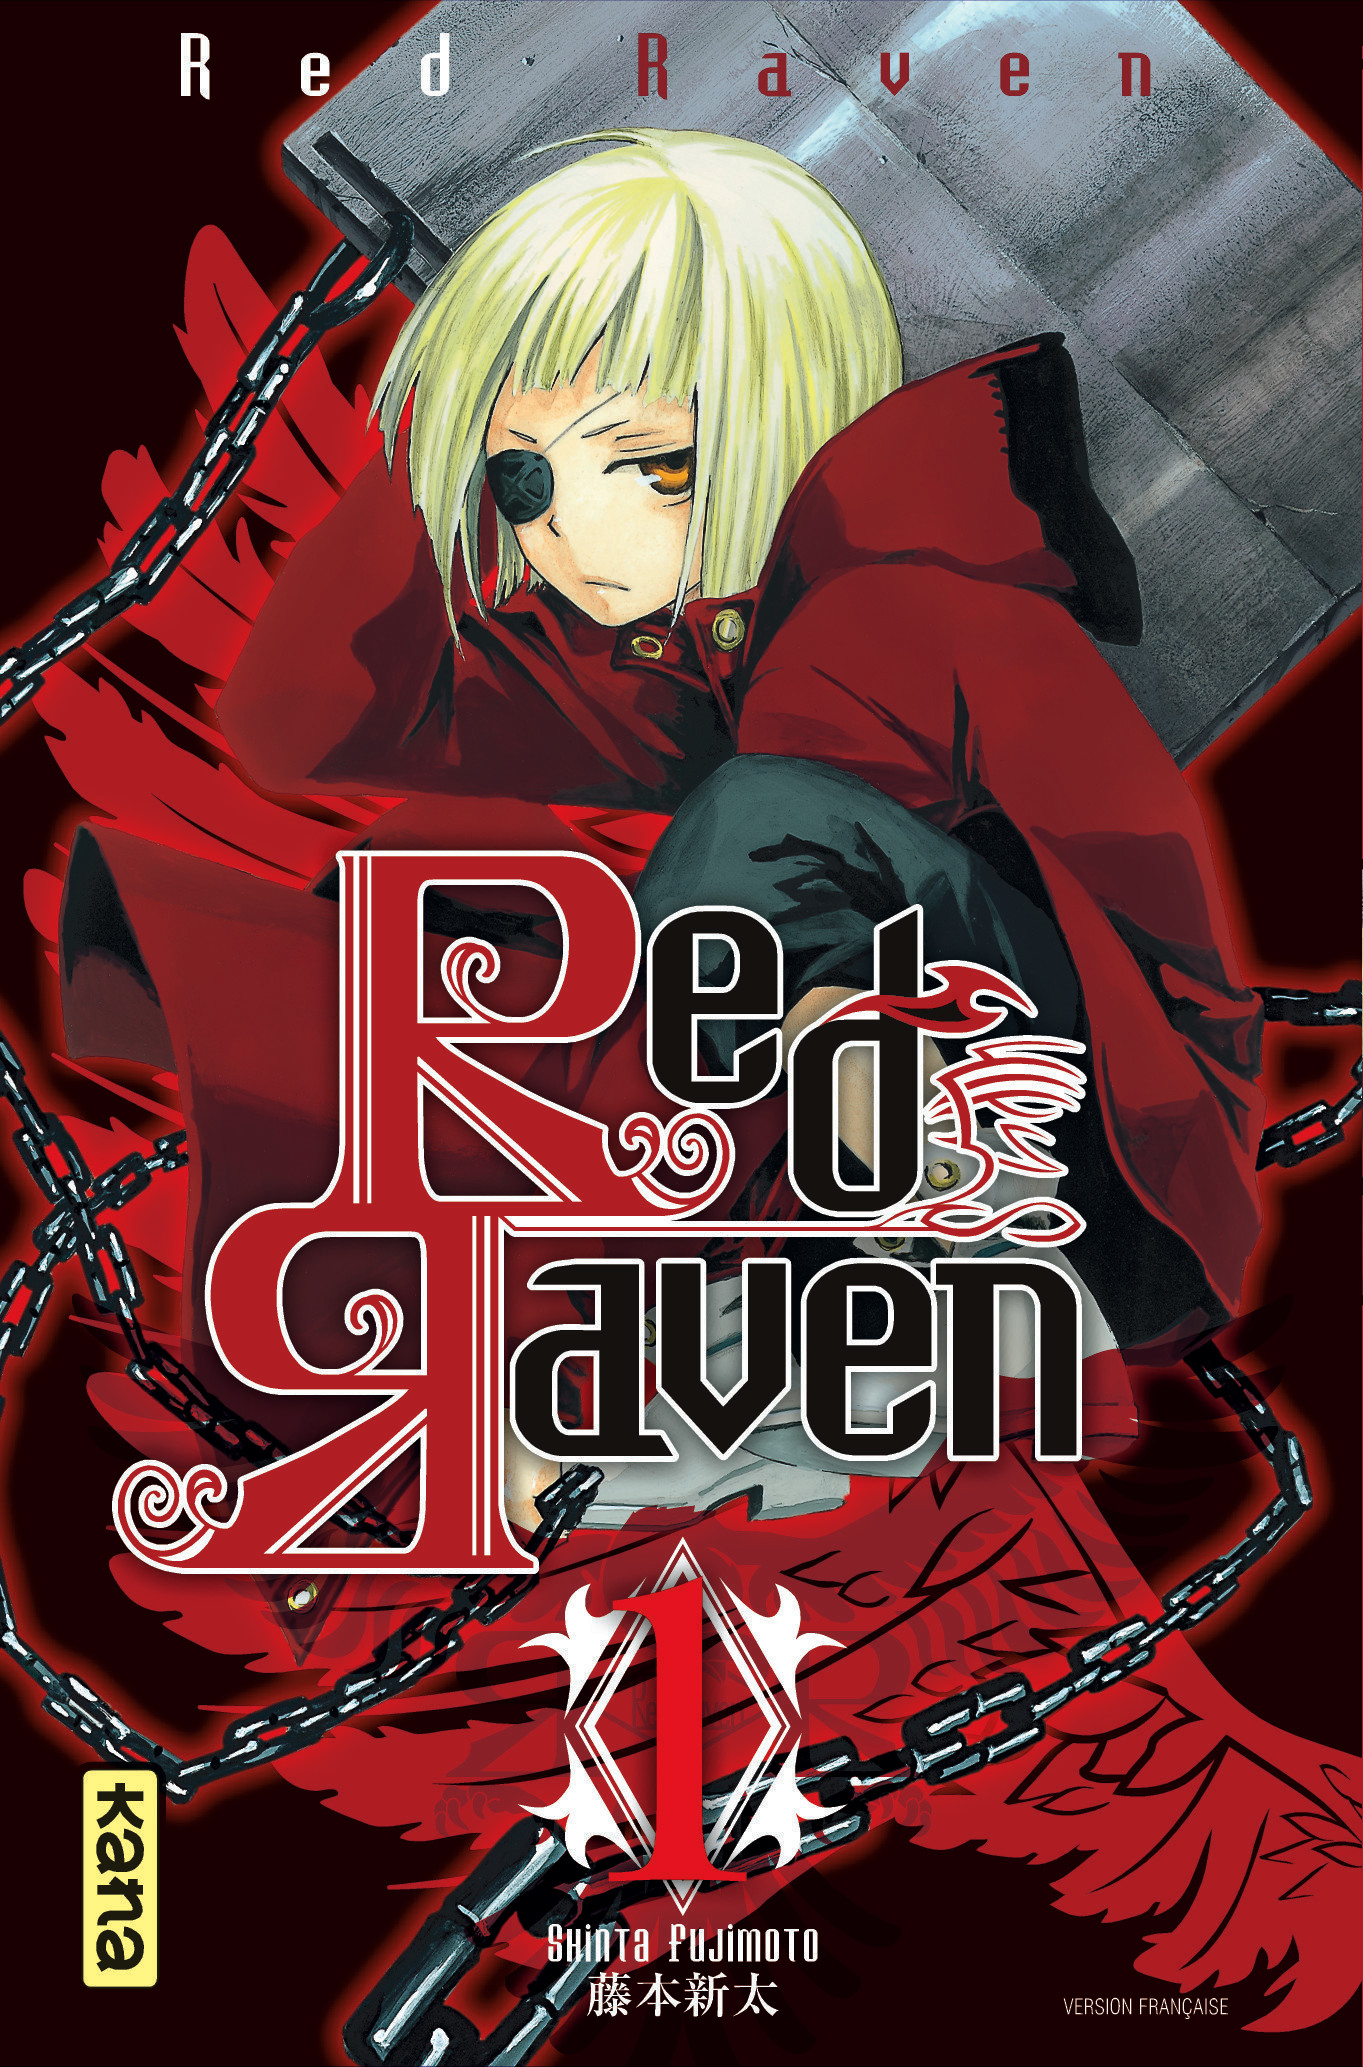 Red Raven – Tome 1 - couv